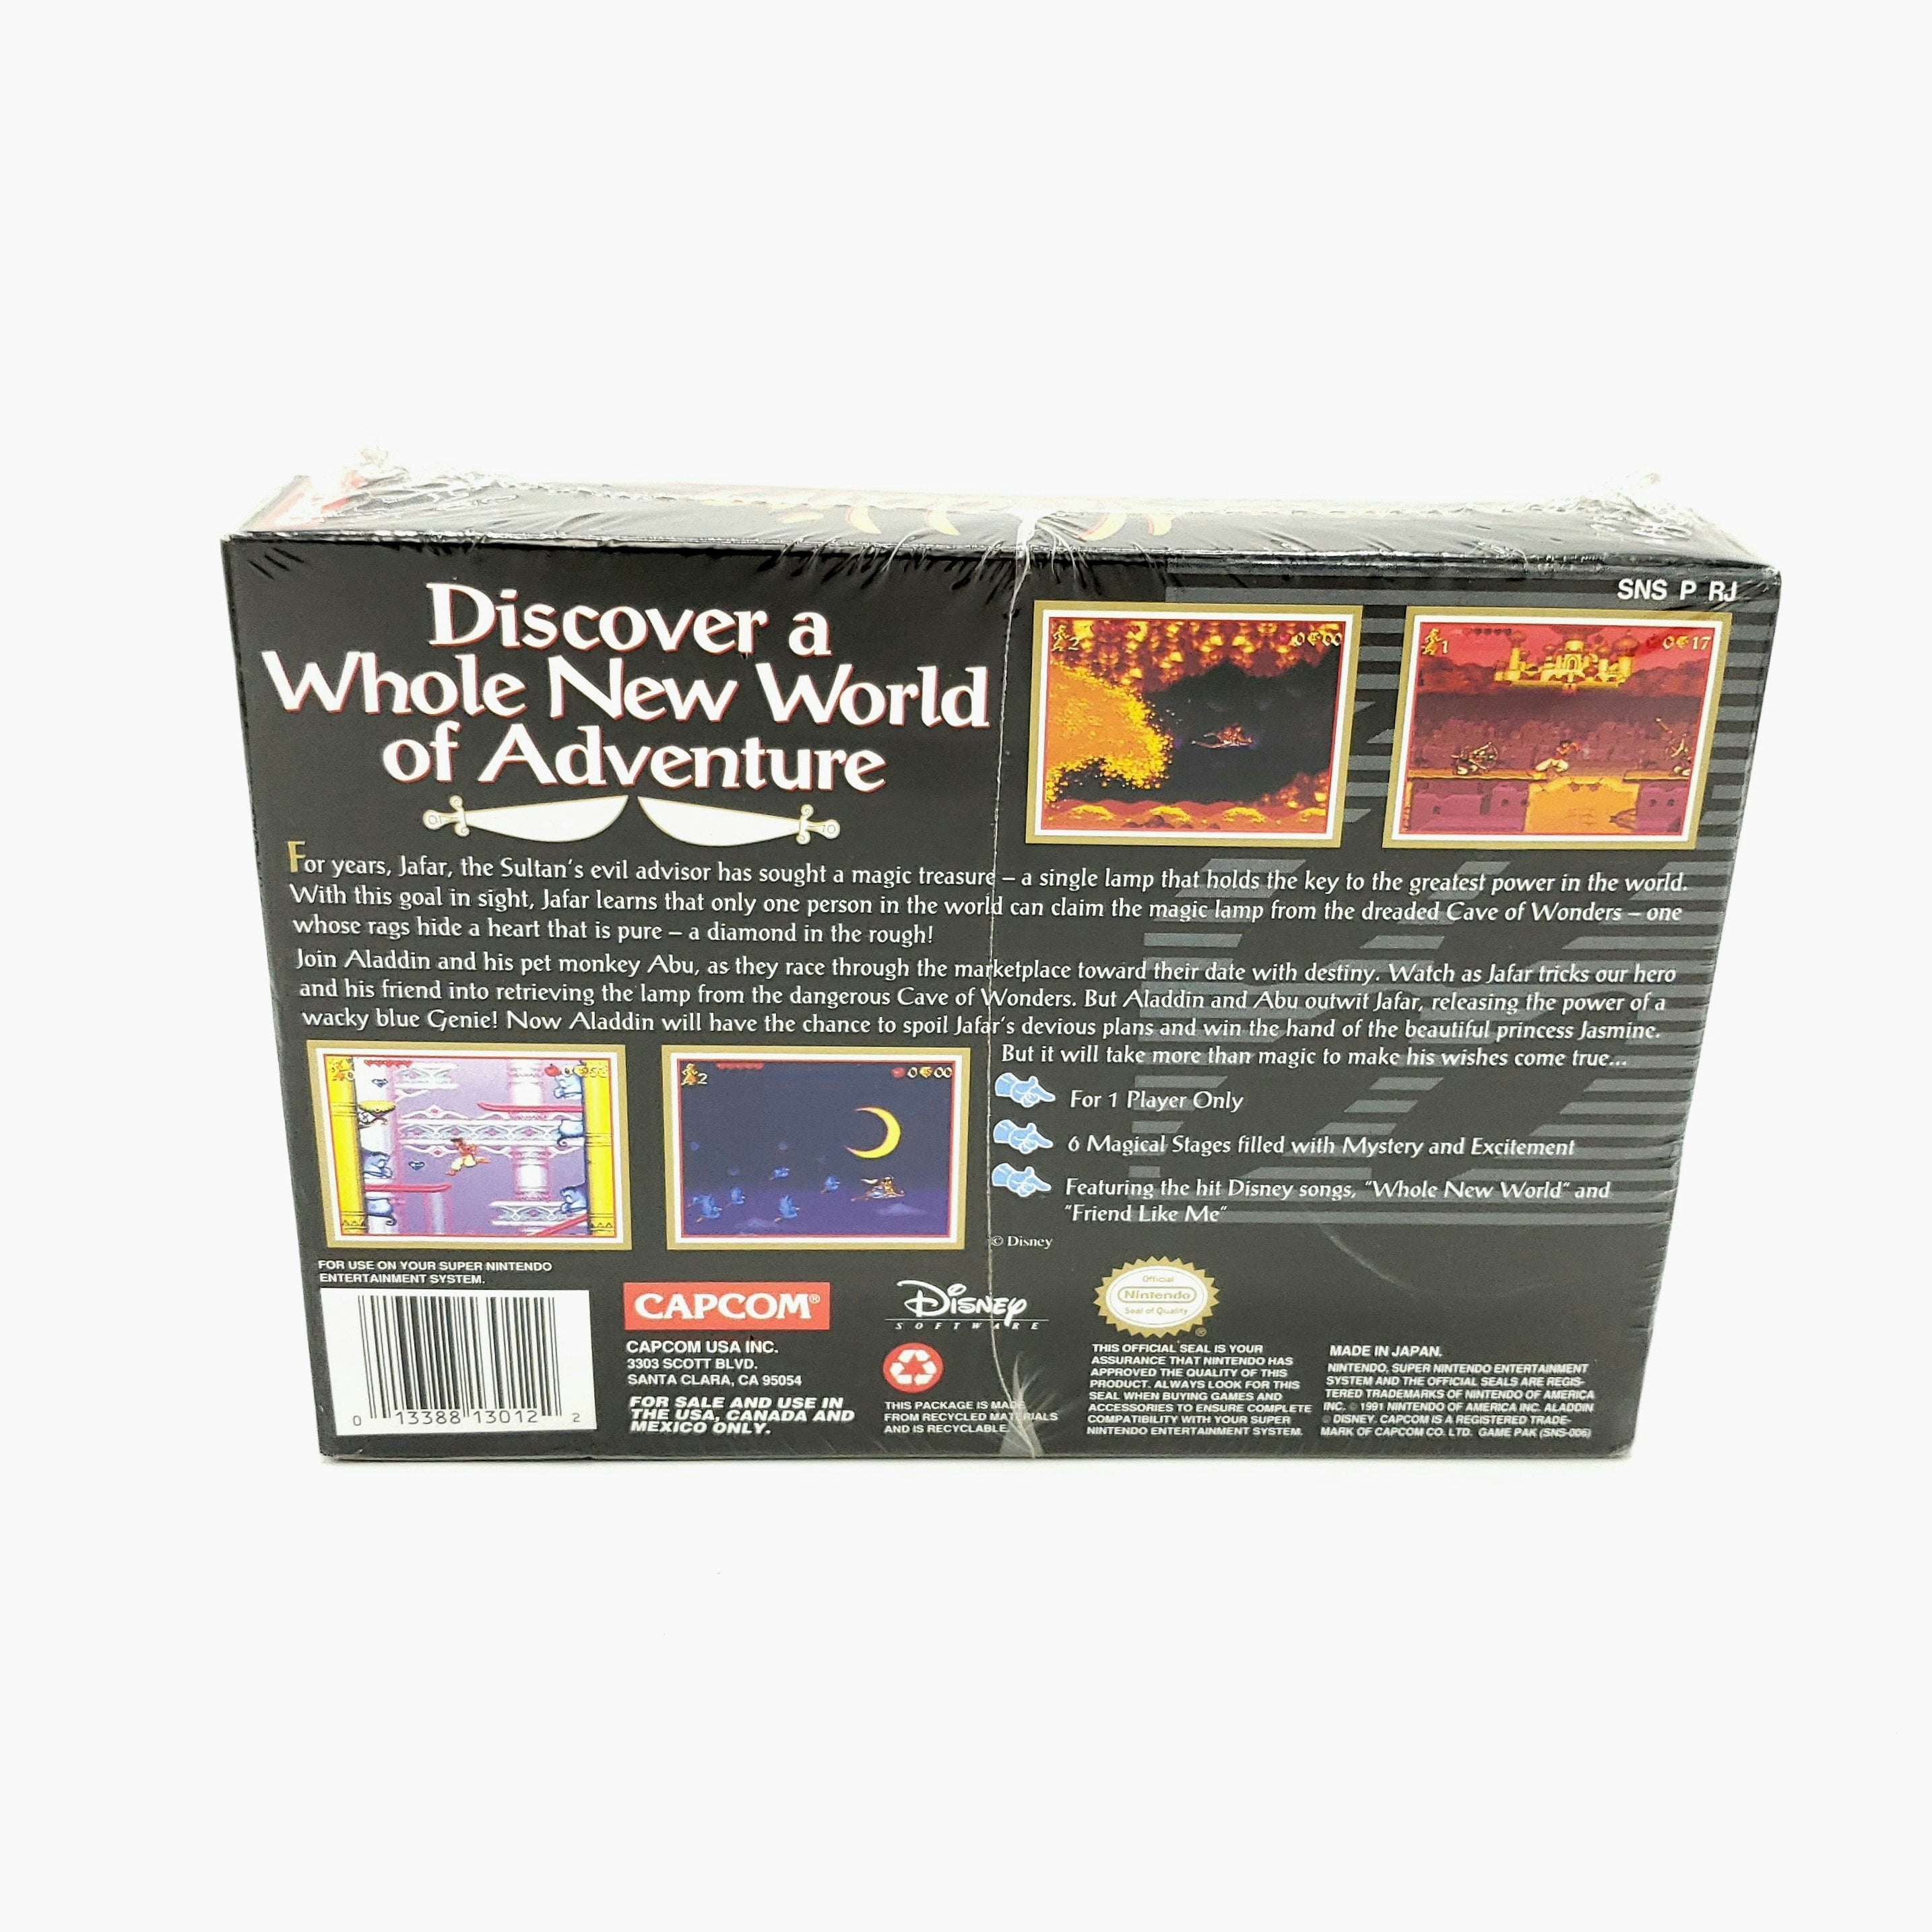 Disney's Aladdin - Super Nintendo (SNES) Game New - YourGamingShop.com - Buy, Sell, Trade Video Games Online. 120 Day Warranty. Satisfaction Guaranteed.